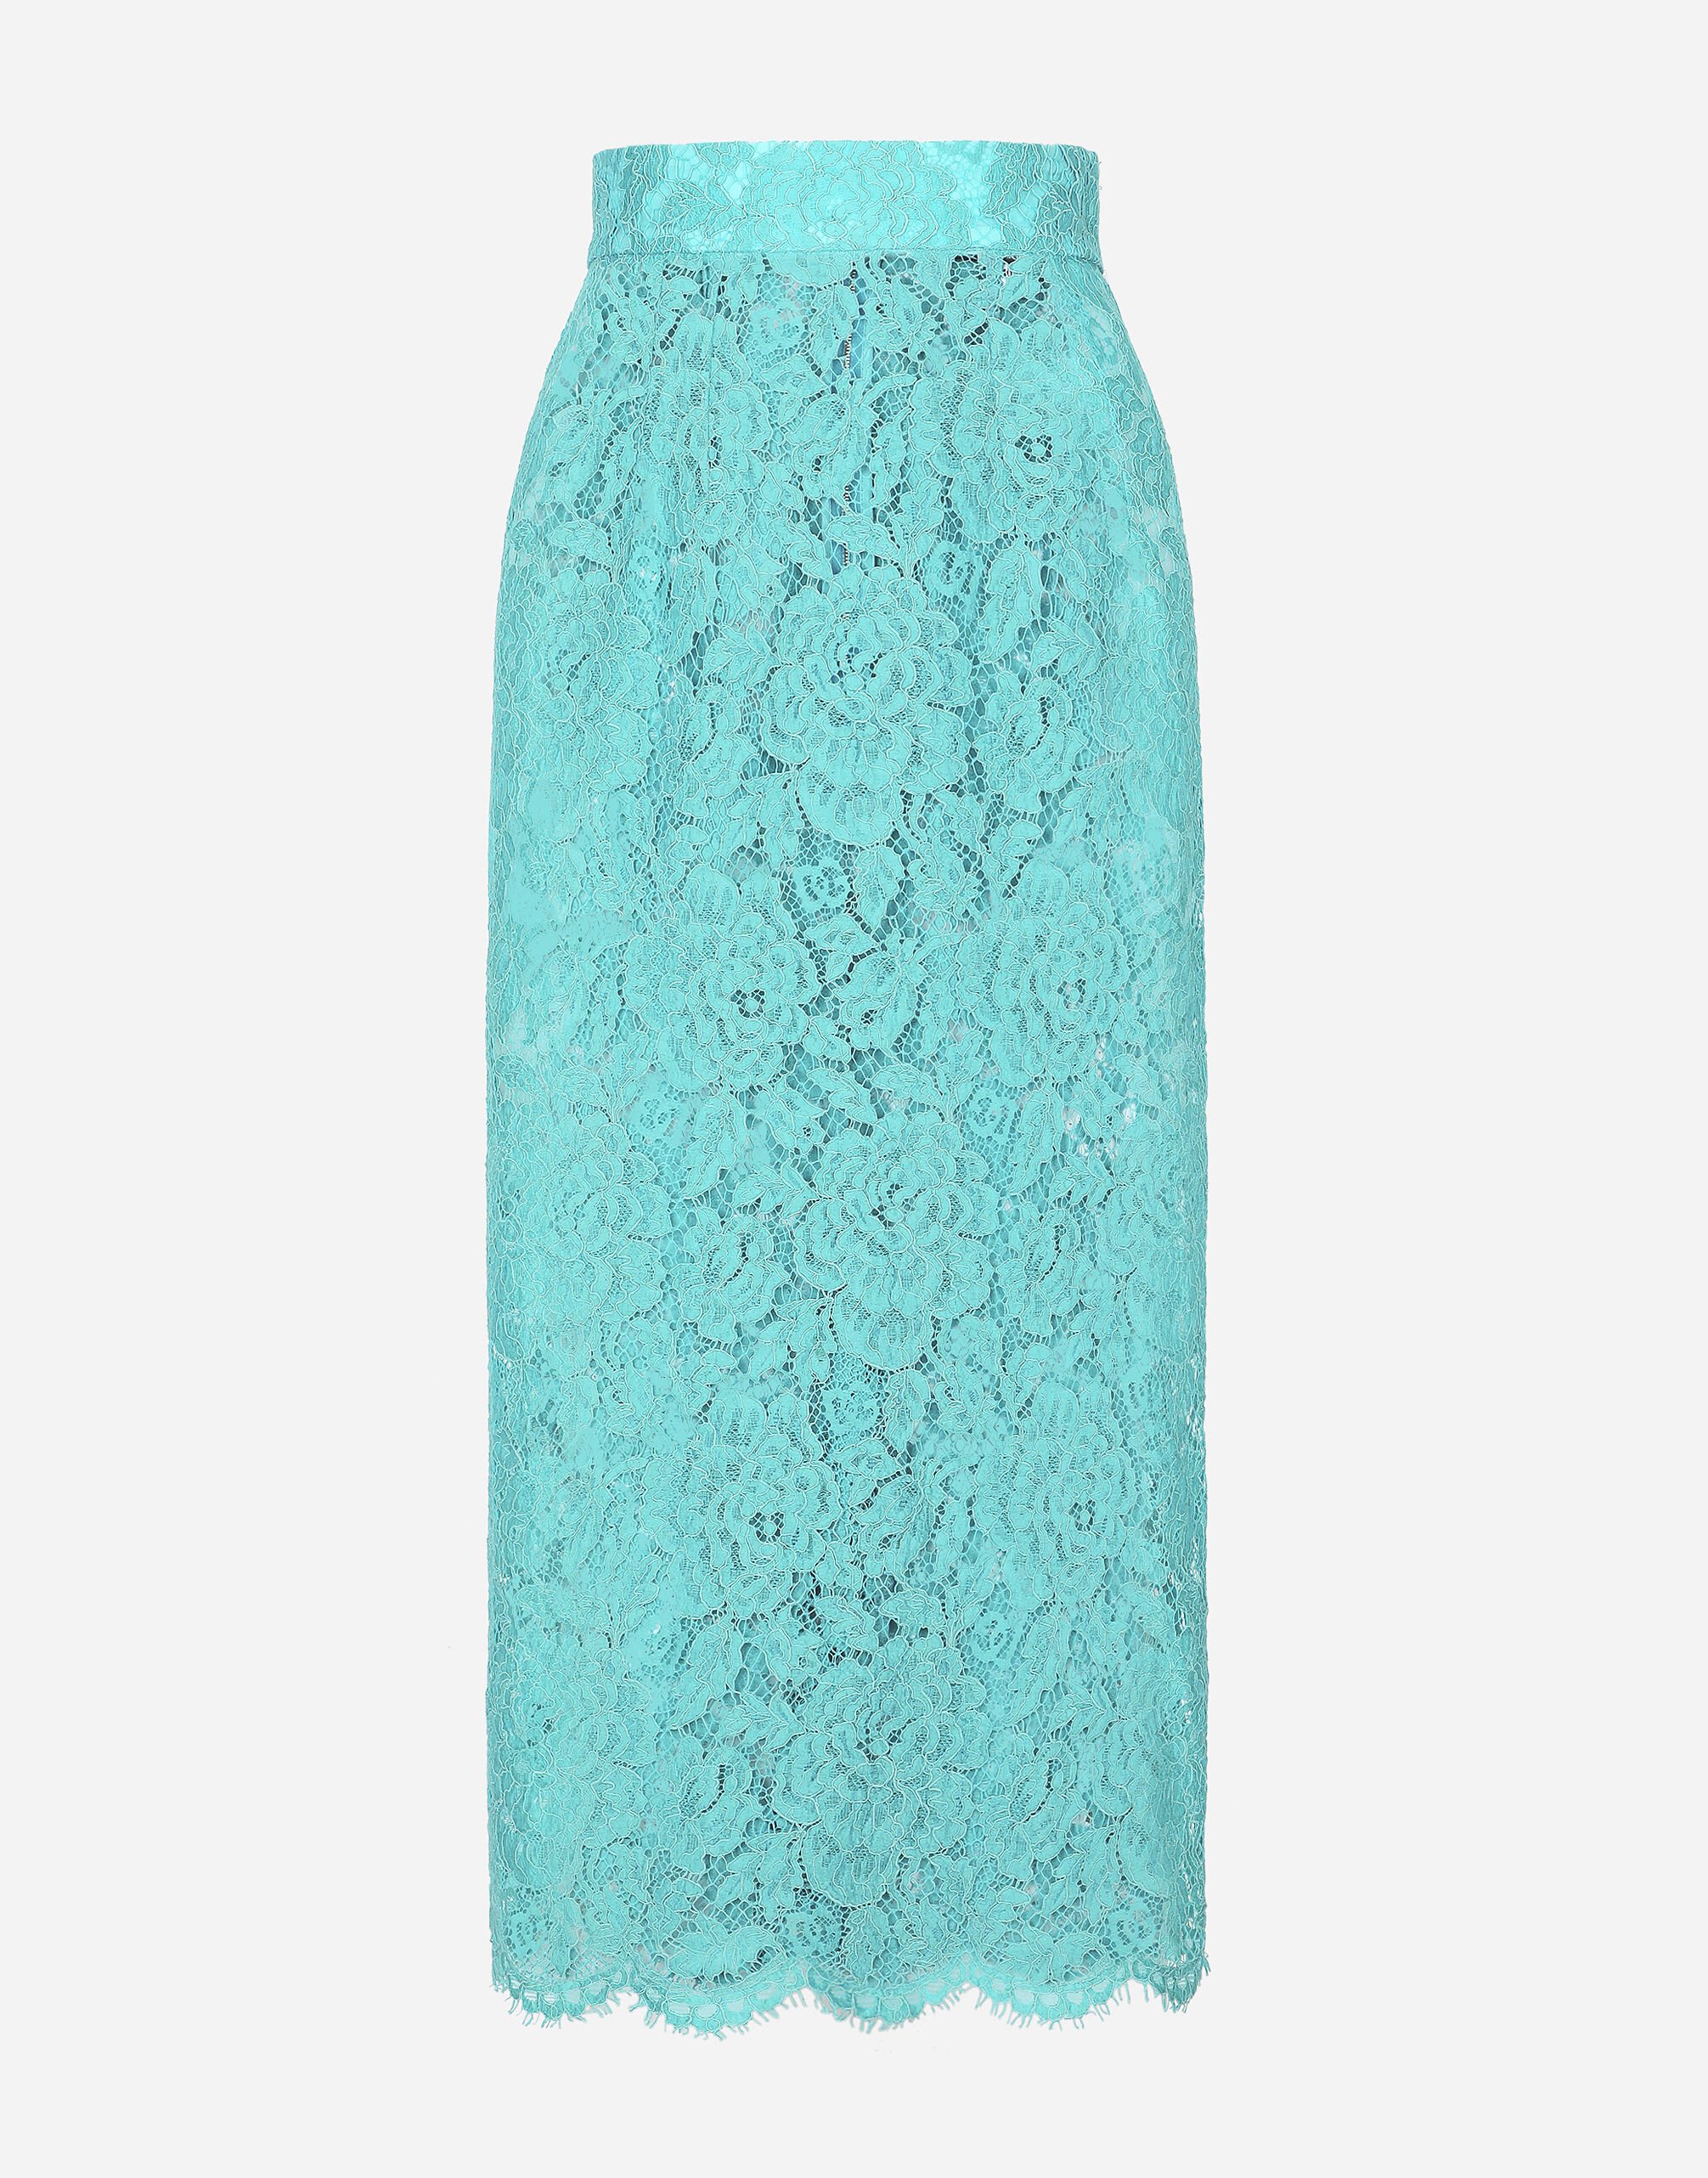 Dolce & Gabbana Branded floral cordonetto lace pencil skirt Turquoise FXL43TJBCAG